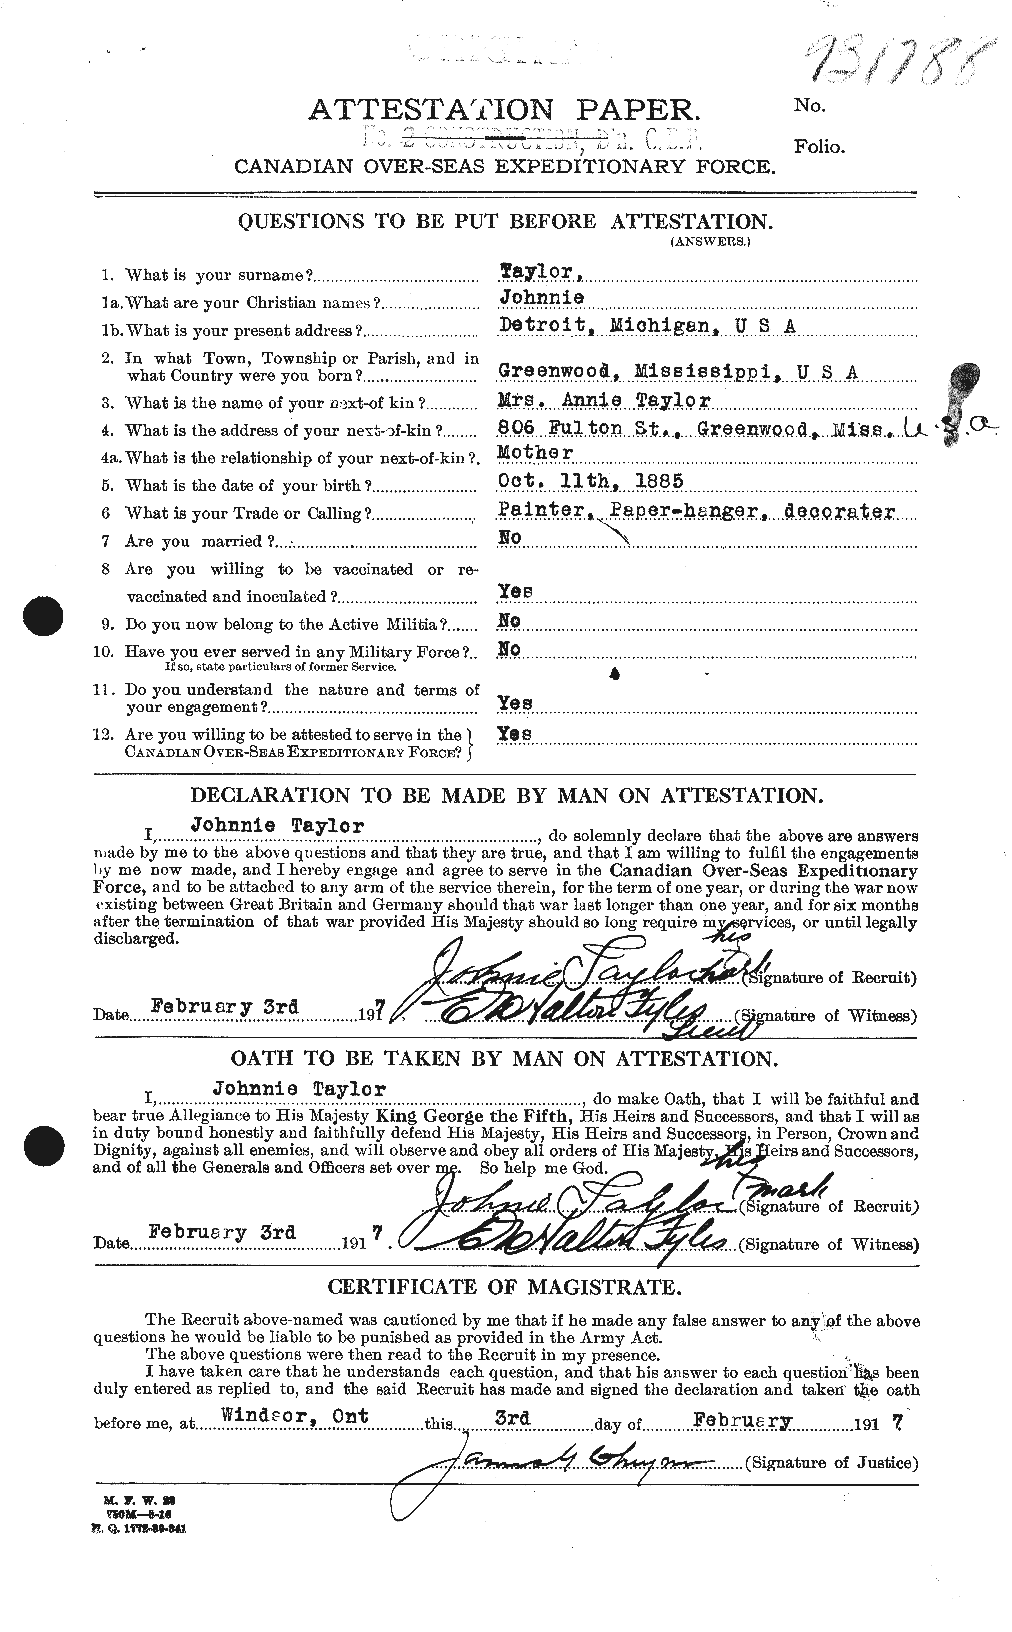 Personnel Records of the First World War - CEF 627554a